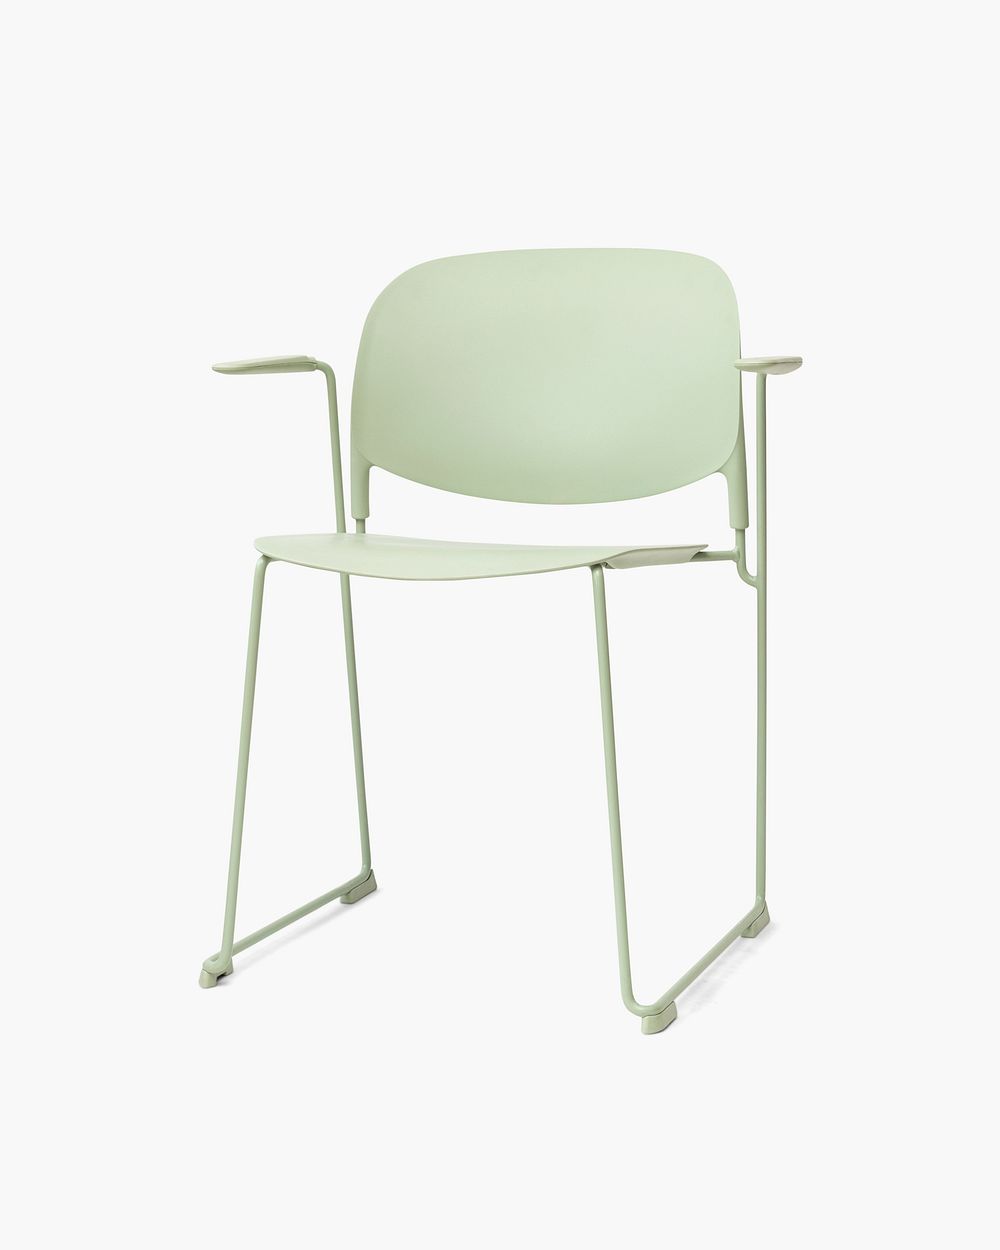 Mint green chair psd mockup for kids room